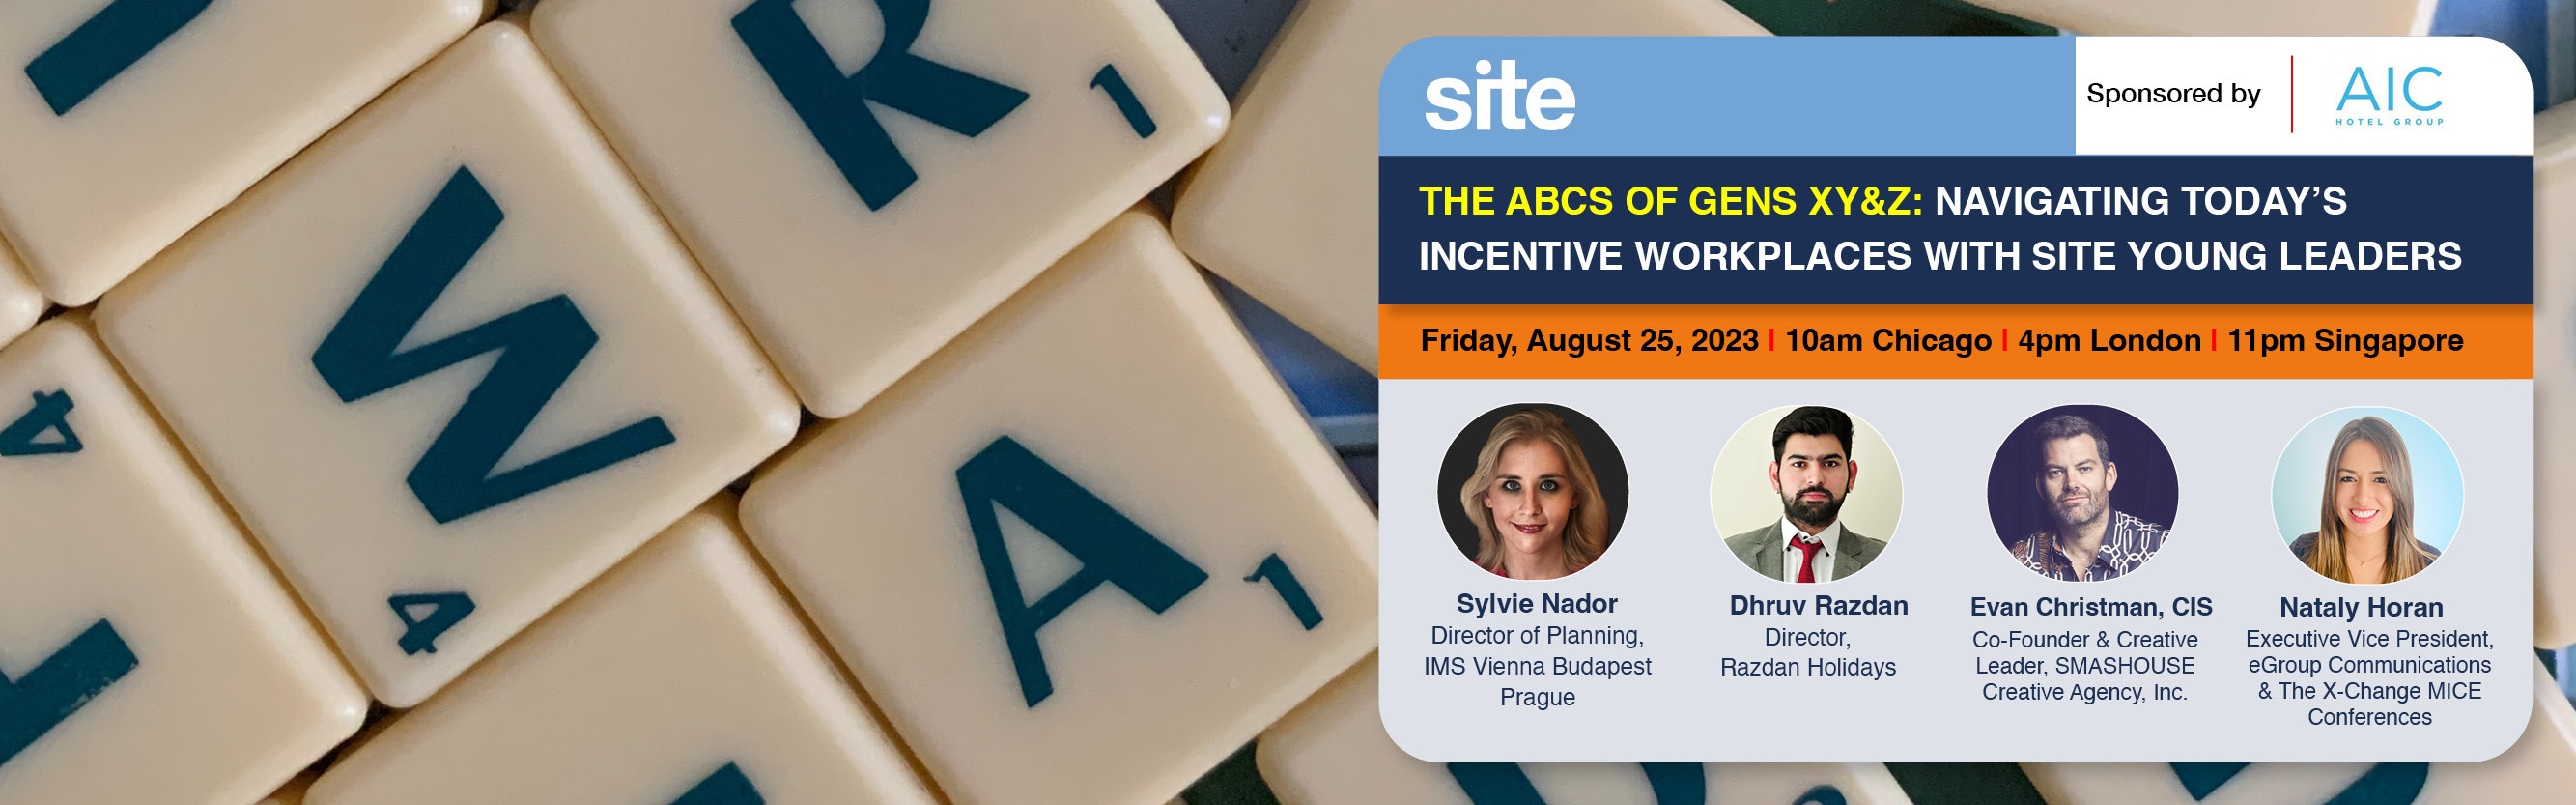 The ABCs of Gens XY&Z: Navigating Today's Incentive Workplaces with SITE Young Leaders